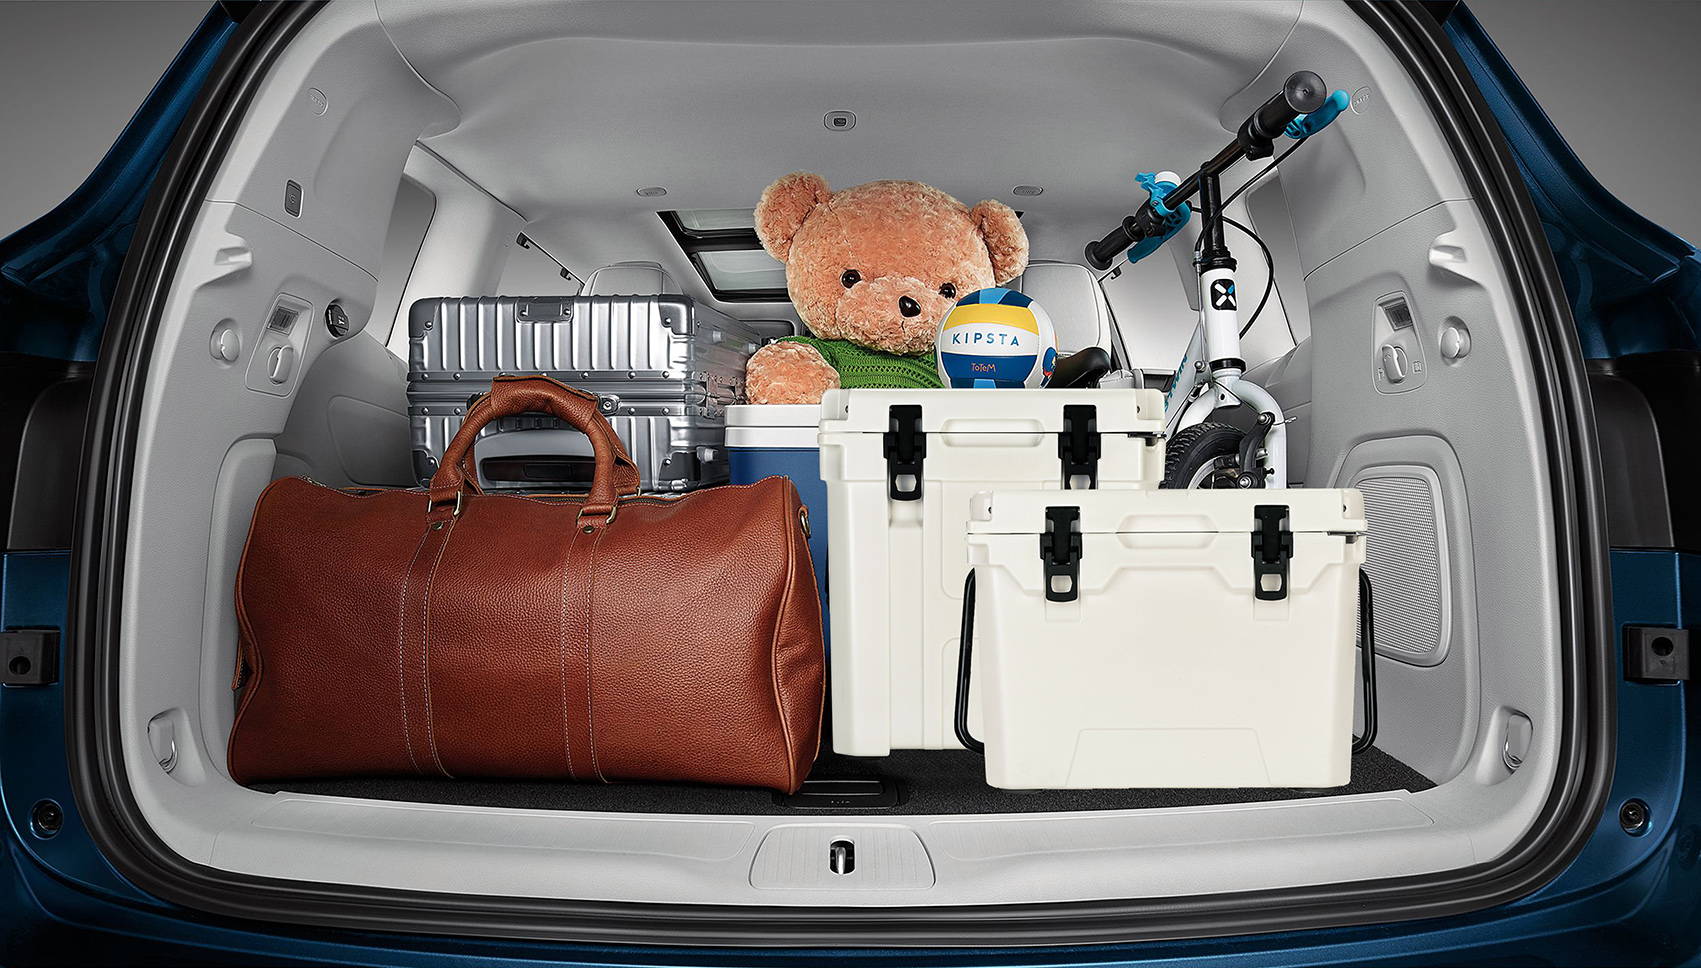 The cooler is placed in the trunk of the car together with other things, making it very portable.